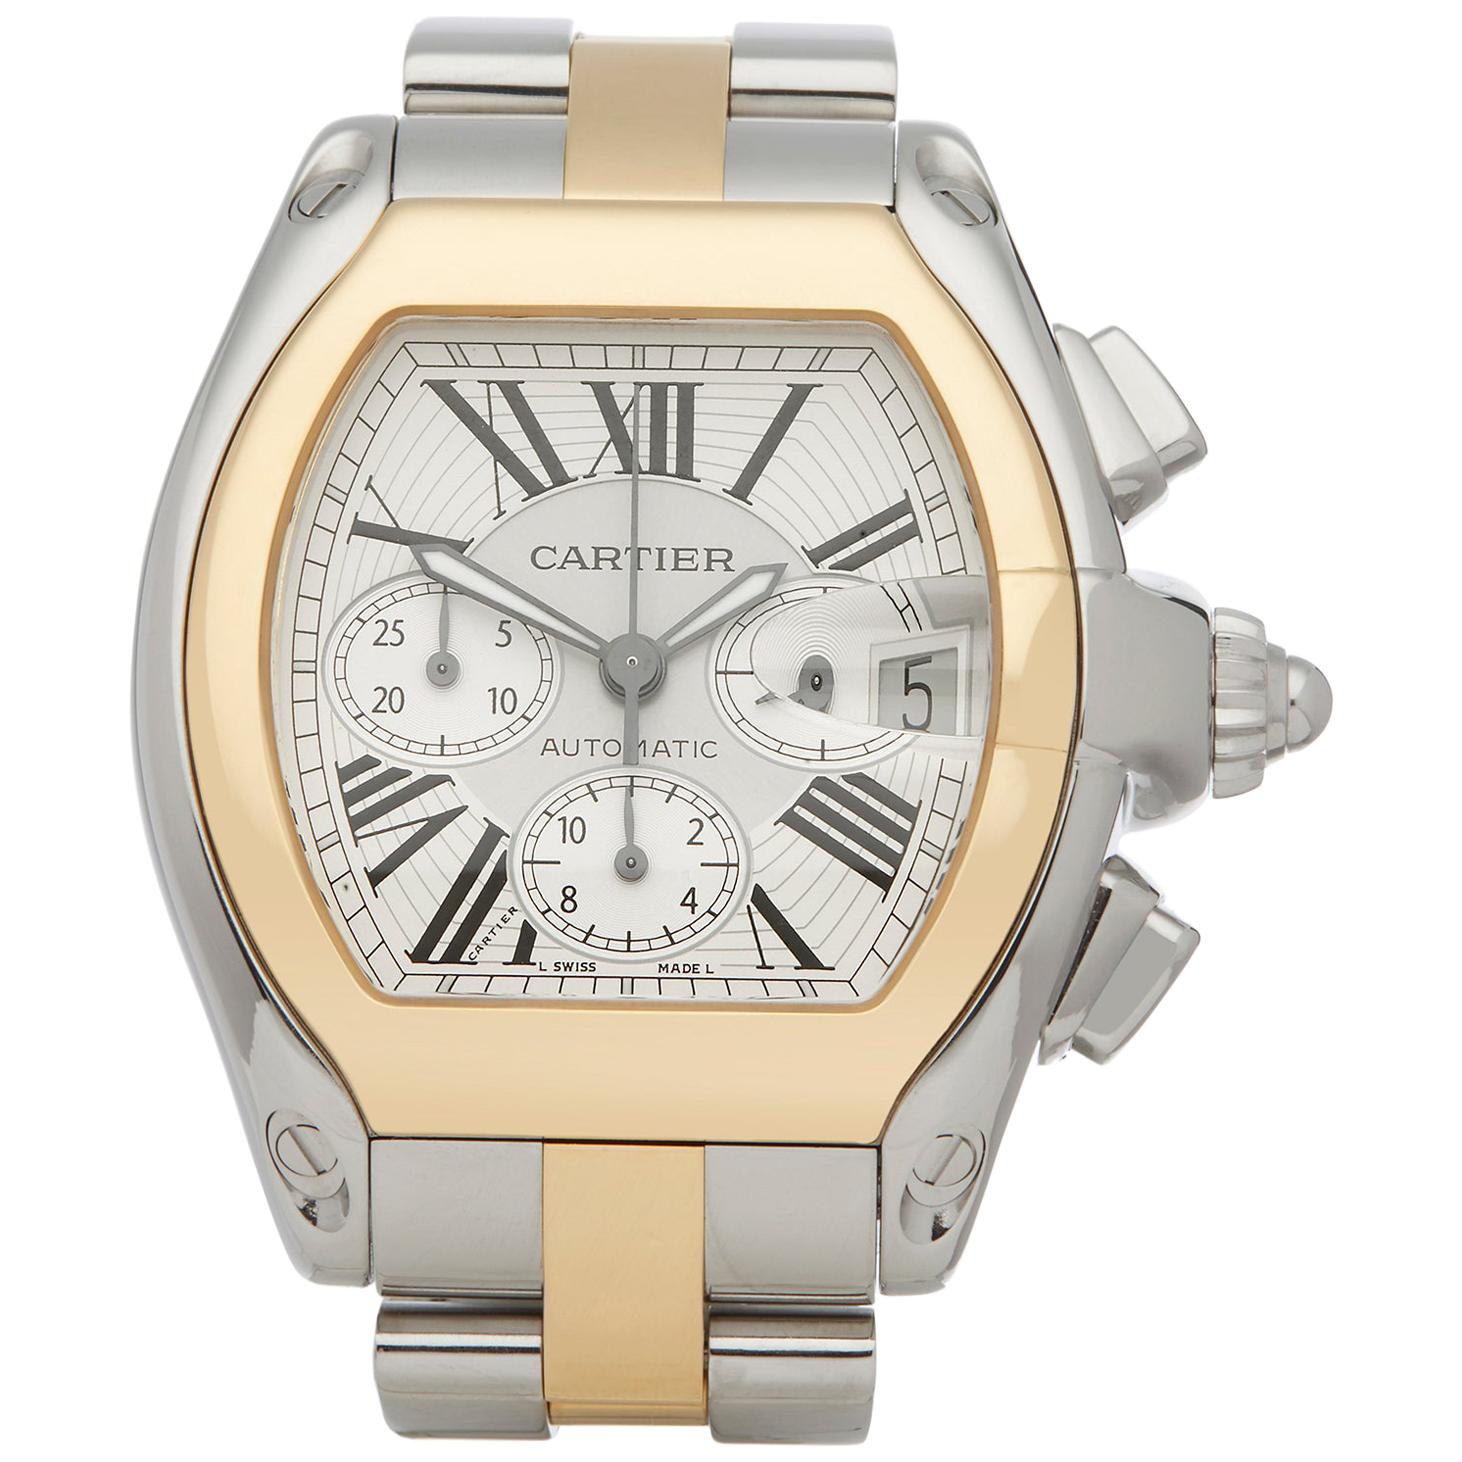 Cartier Roadster XL Chronograph Stainless Steel and Yellow Gold 2618